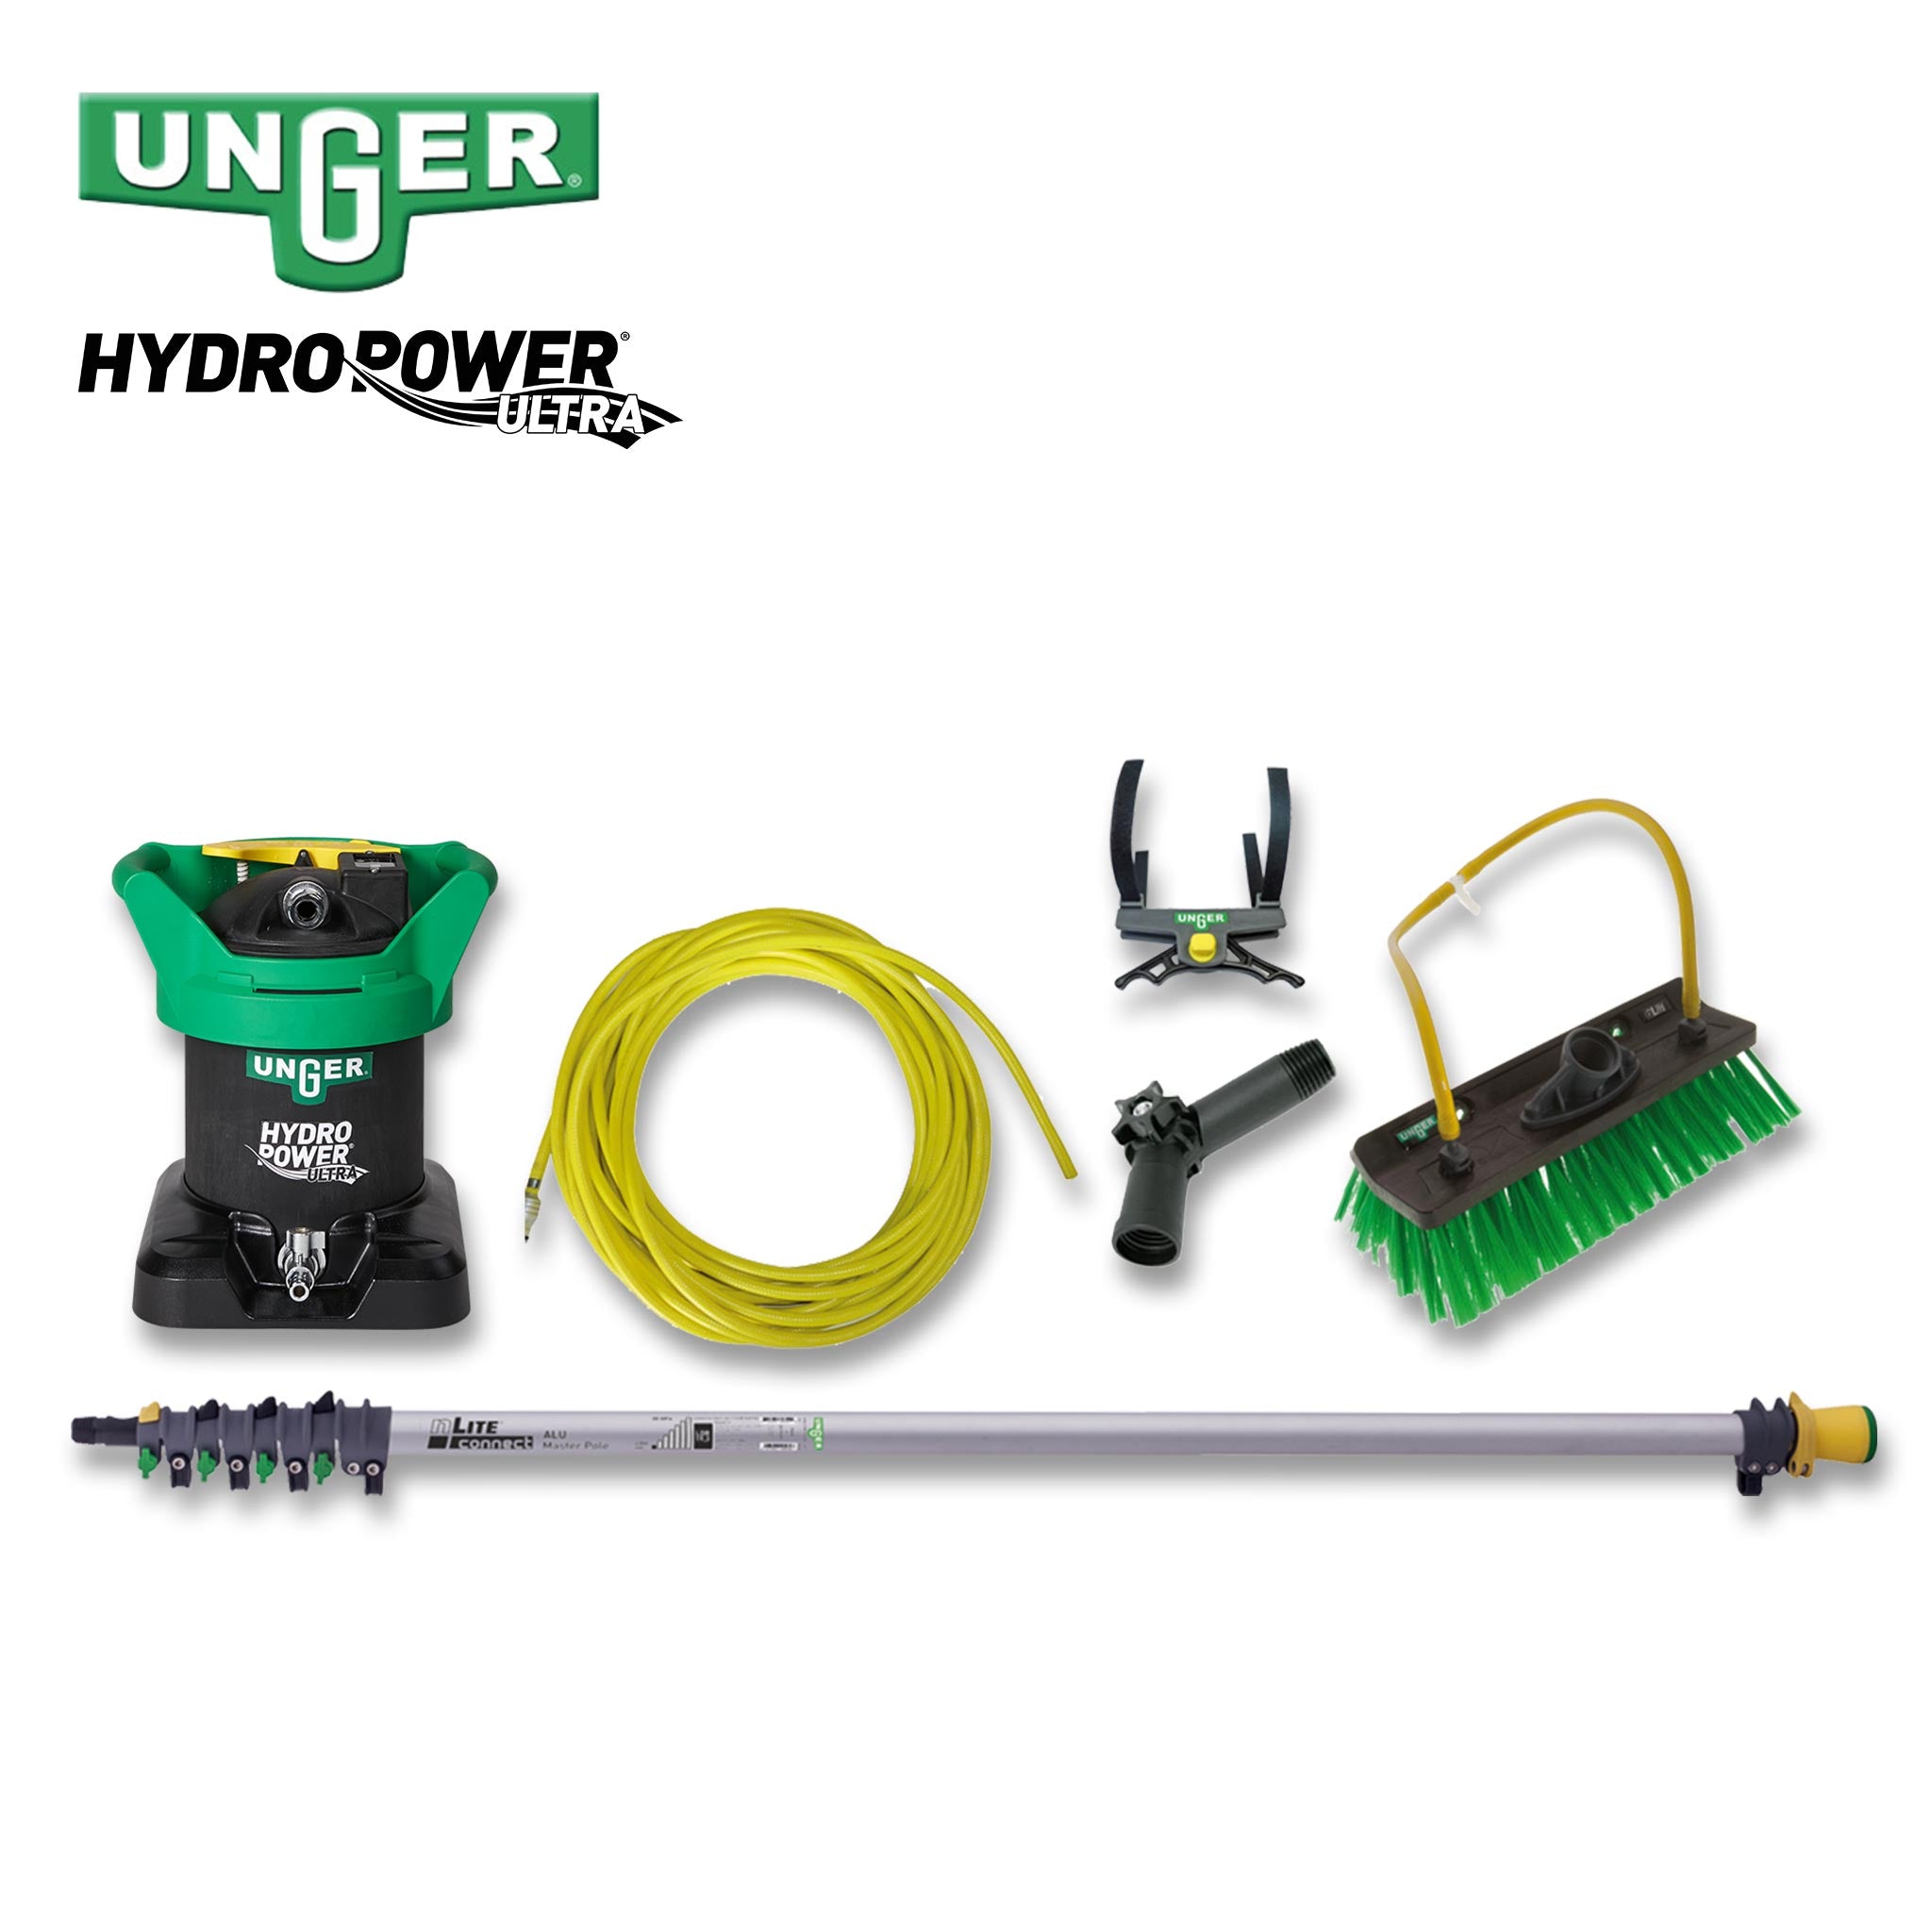 Unger HydroPower Ultra S with Alloy Kit